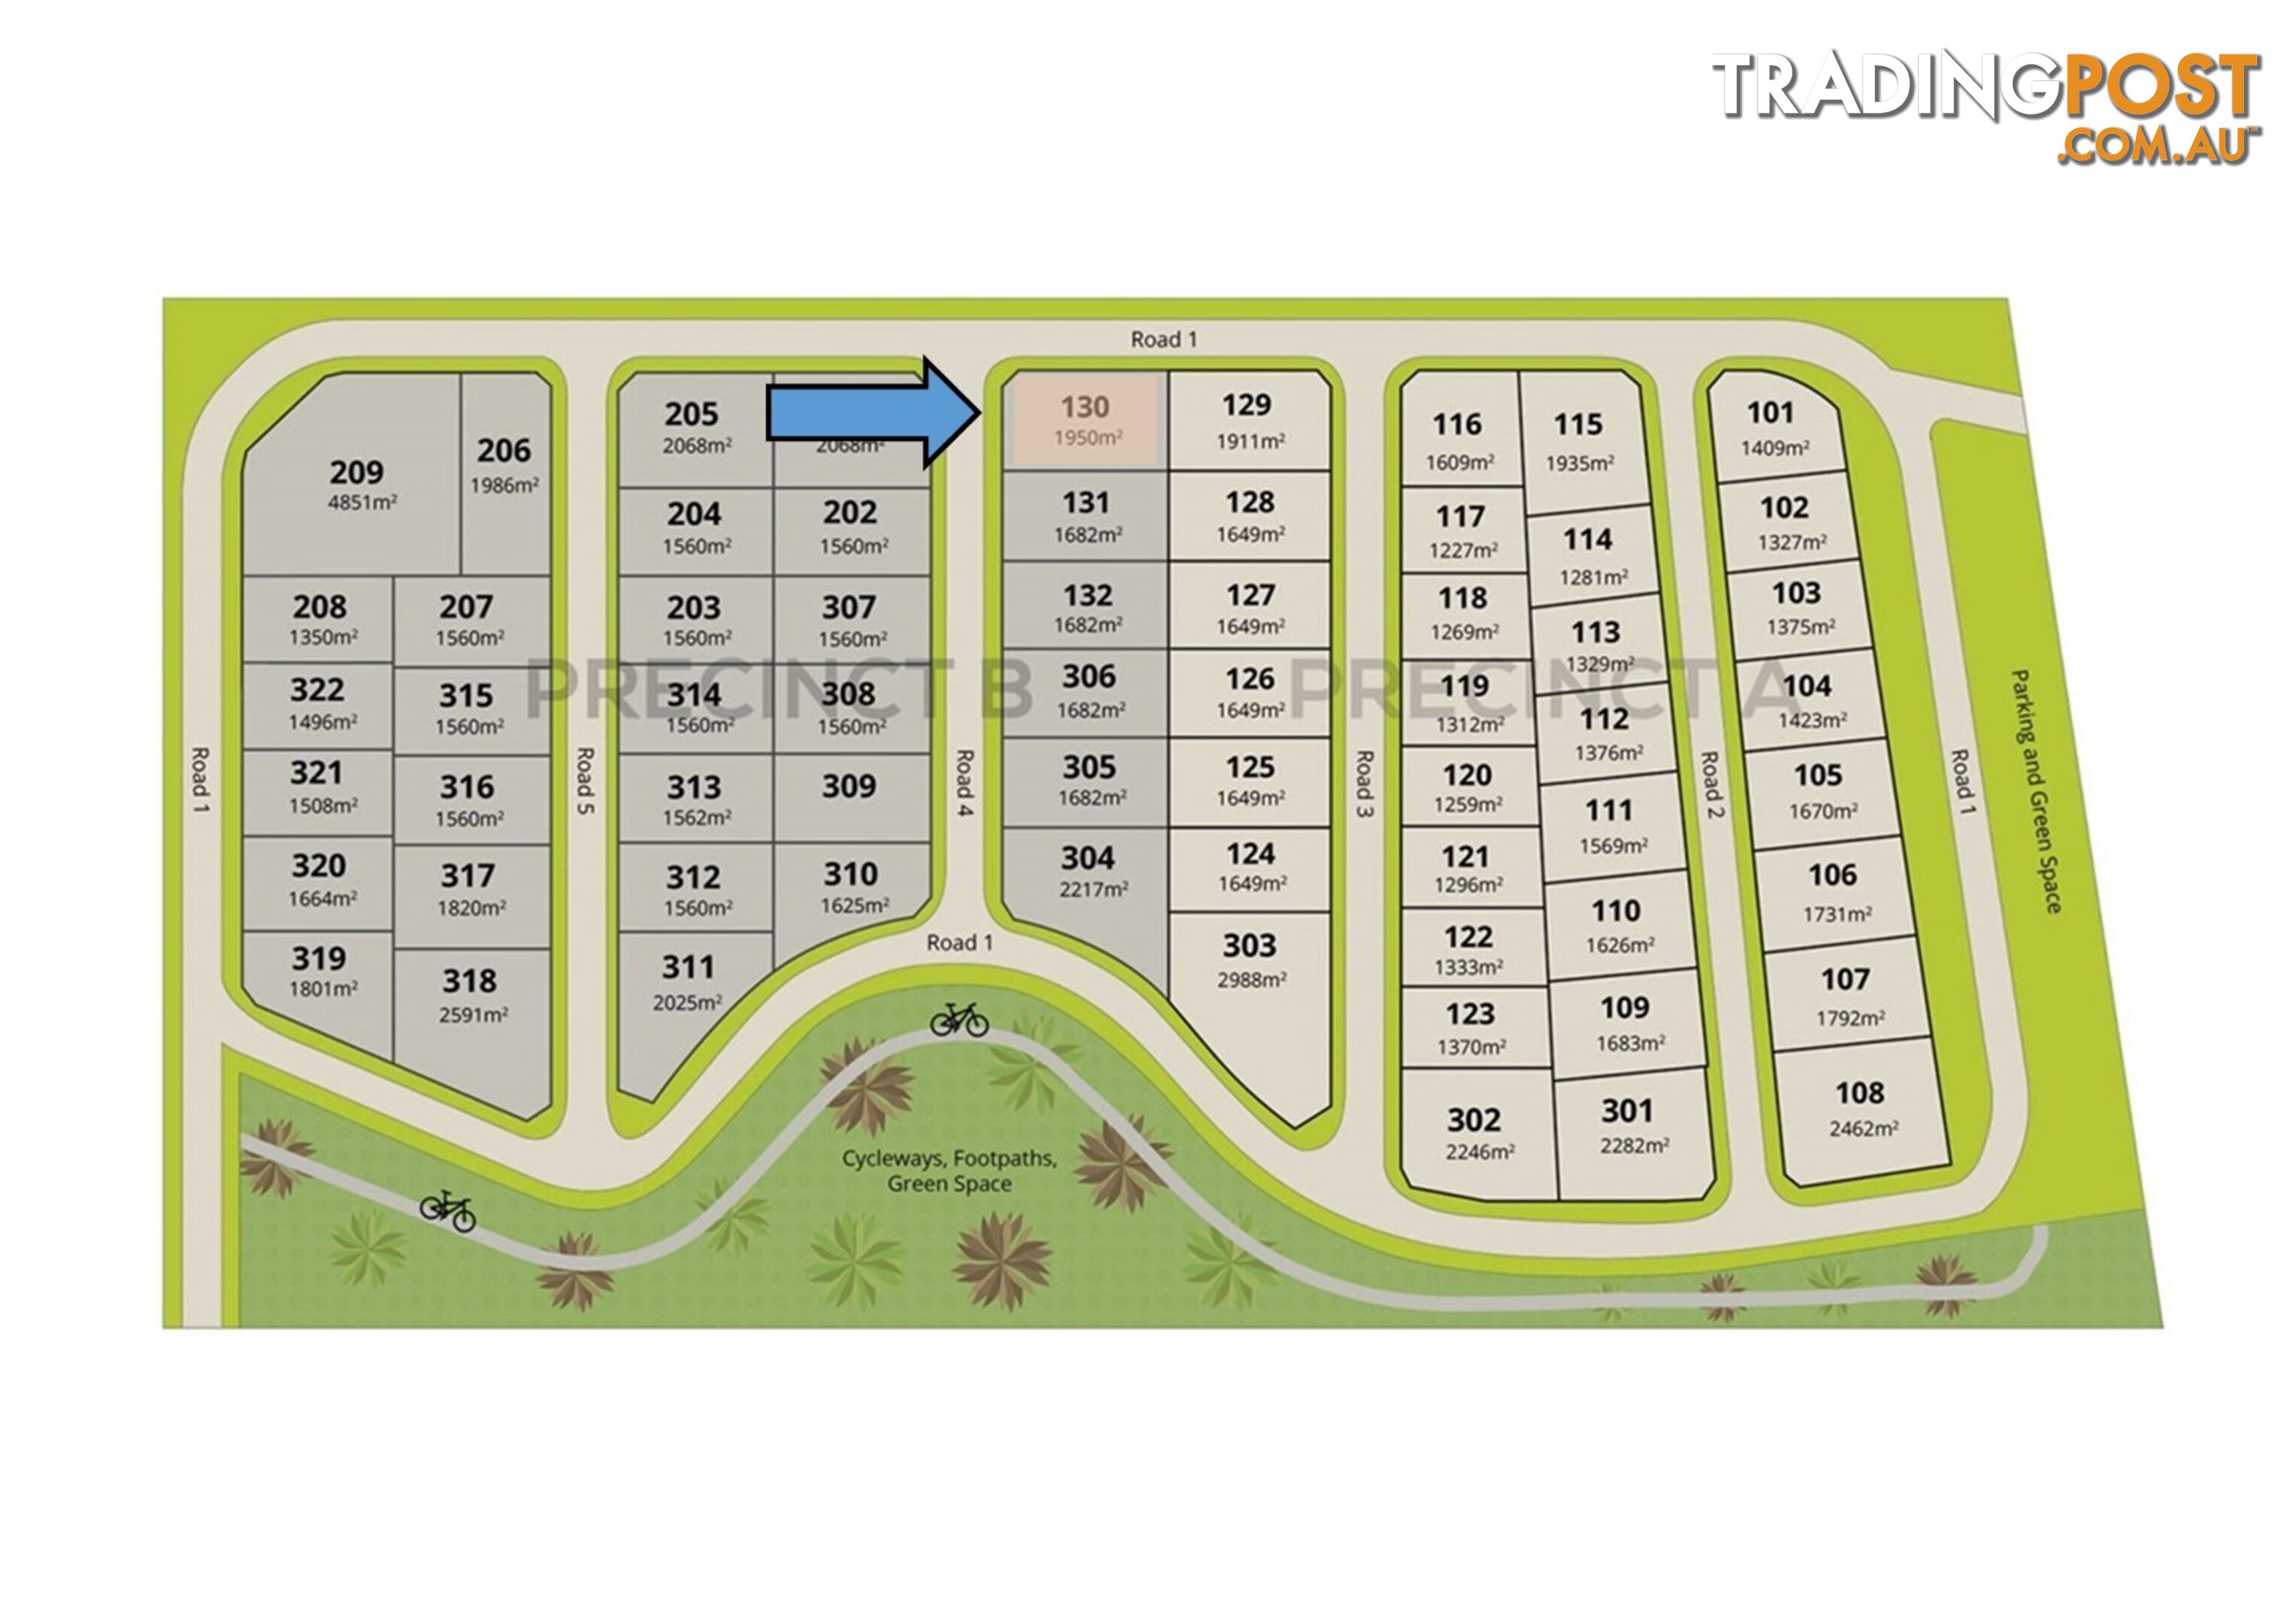 Lot 130/344 John Oxley Drive THRUMSTER NSW 2444